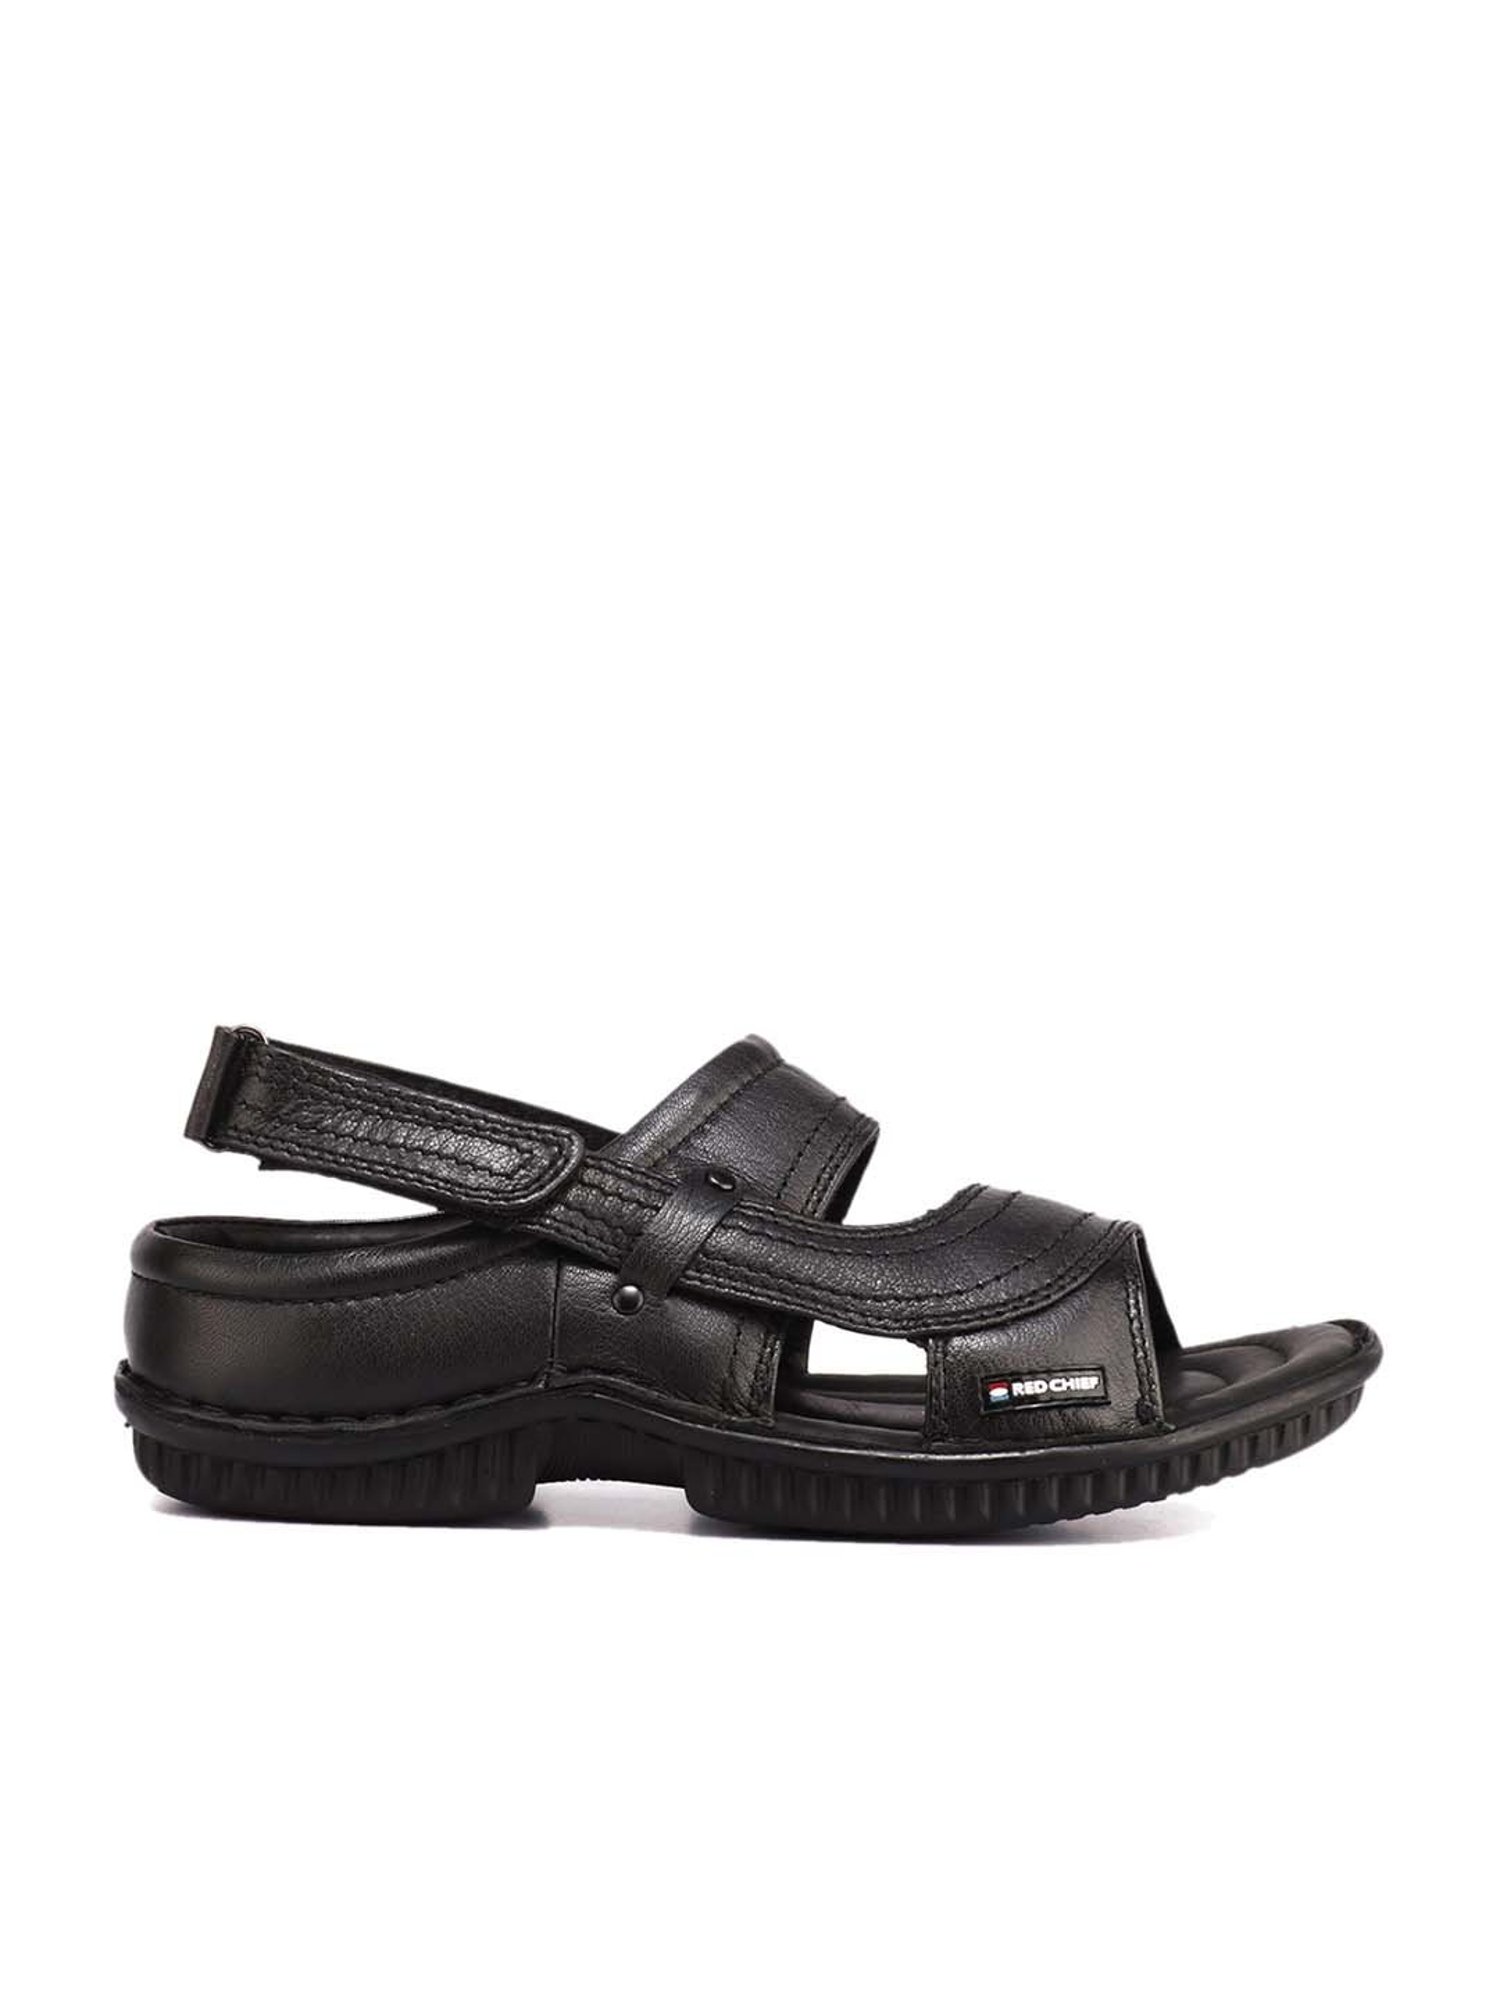 Buy Red Chief Black Leather slippers and sandals for men at Amazon.in